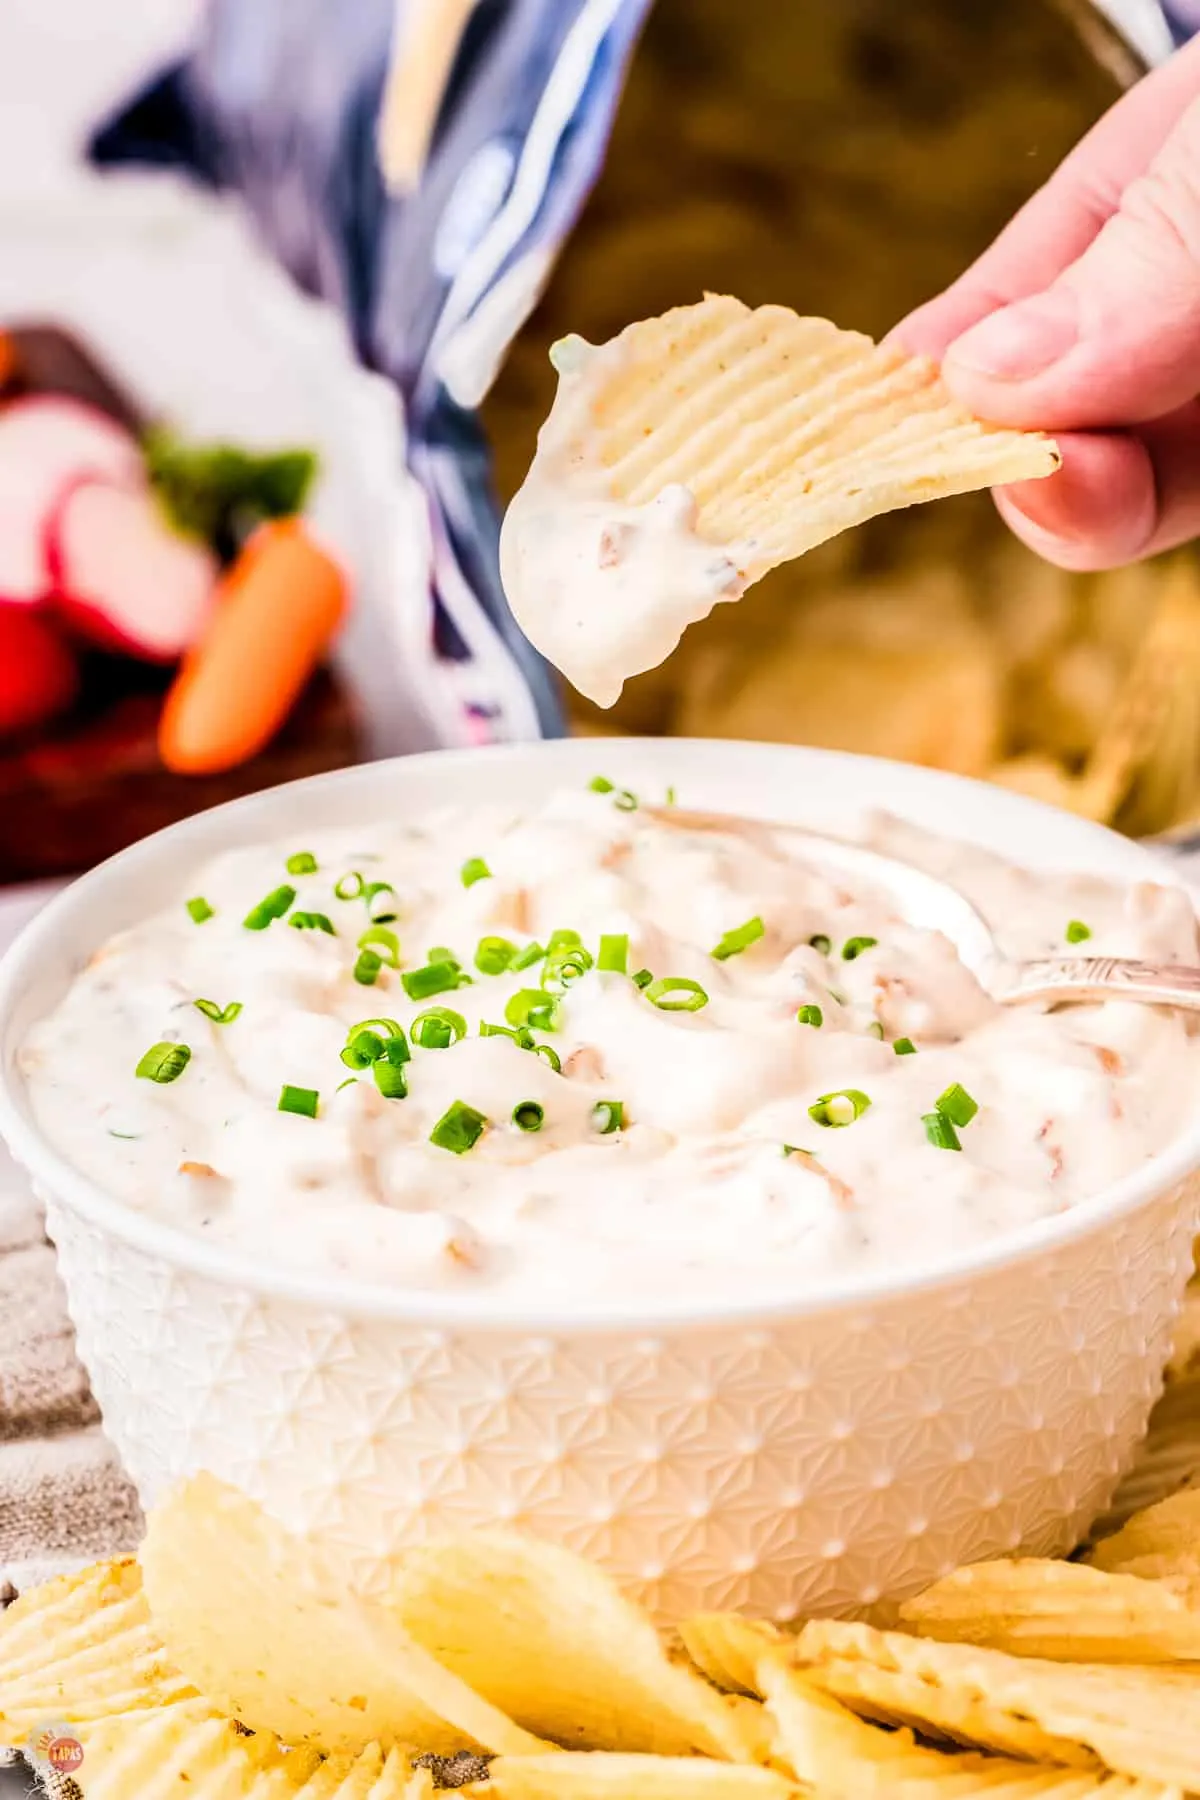 salty potato chips are best for this dip